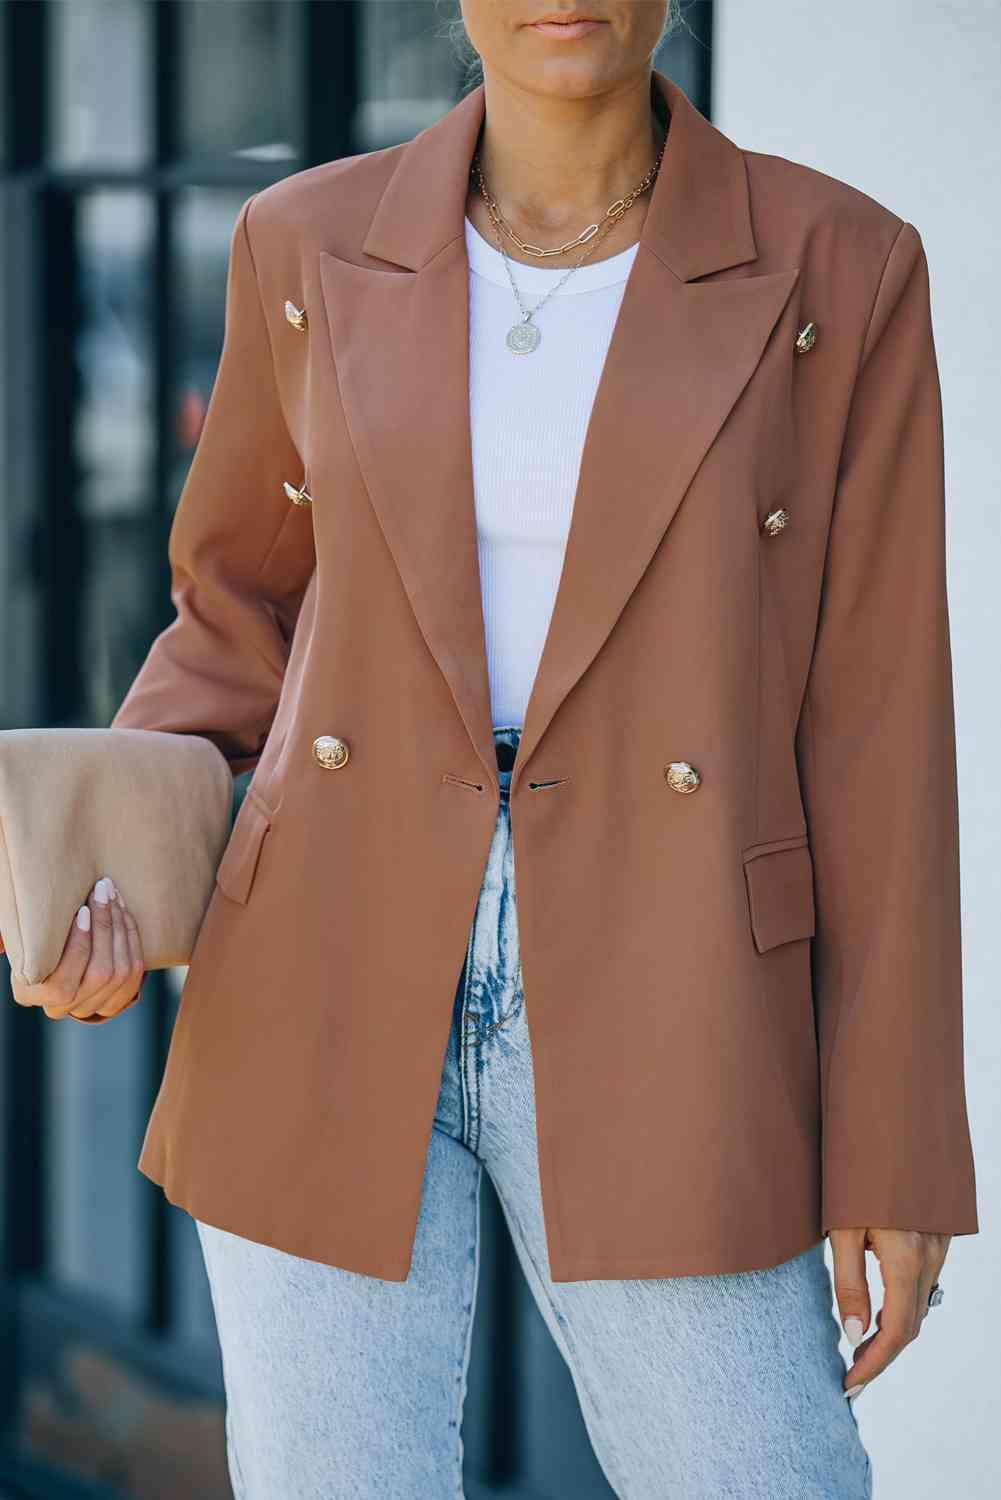 a woman wearing a brown blazer and jeans